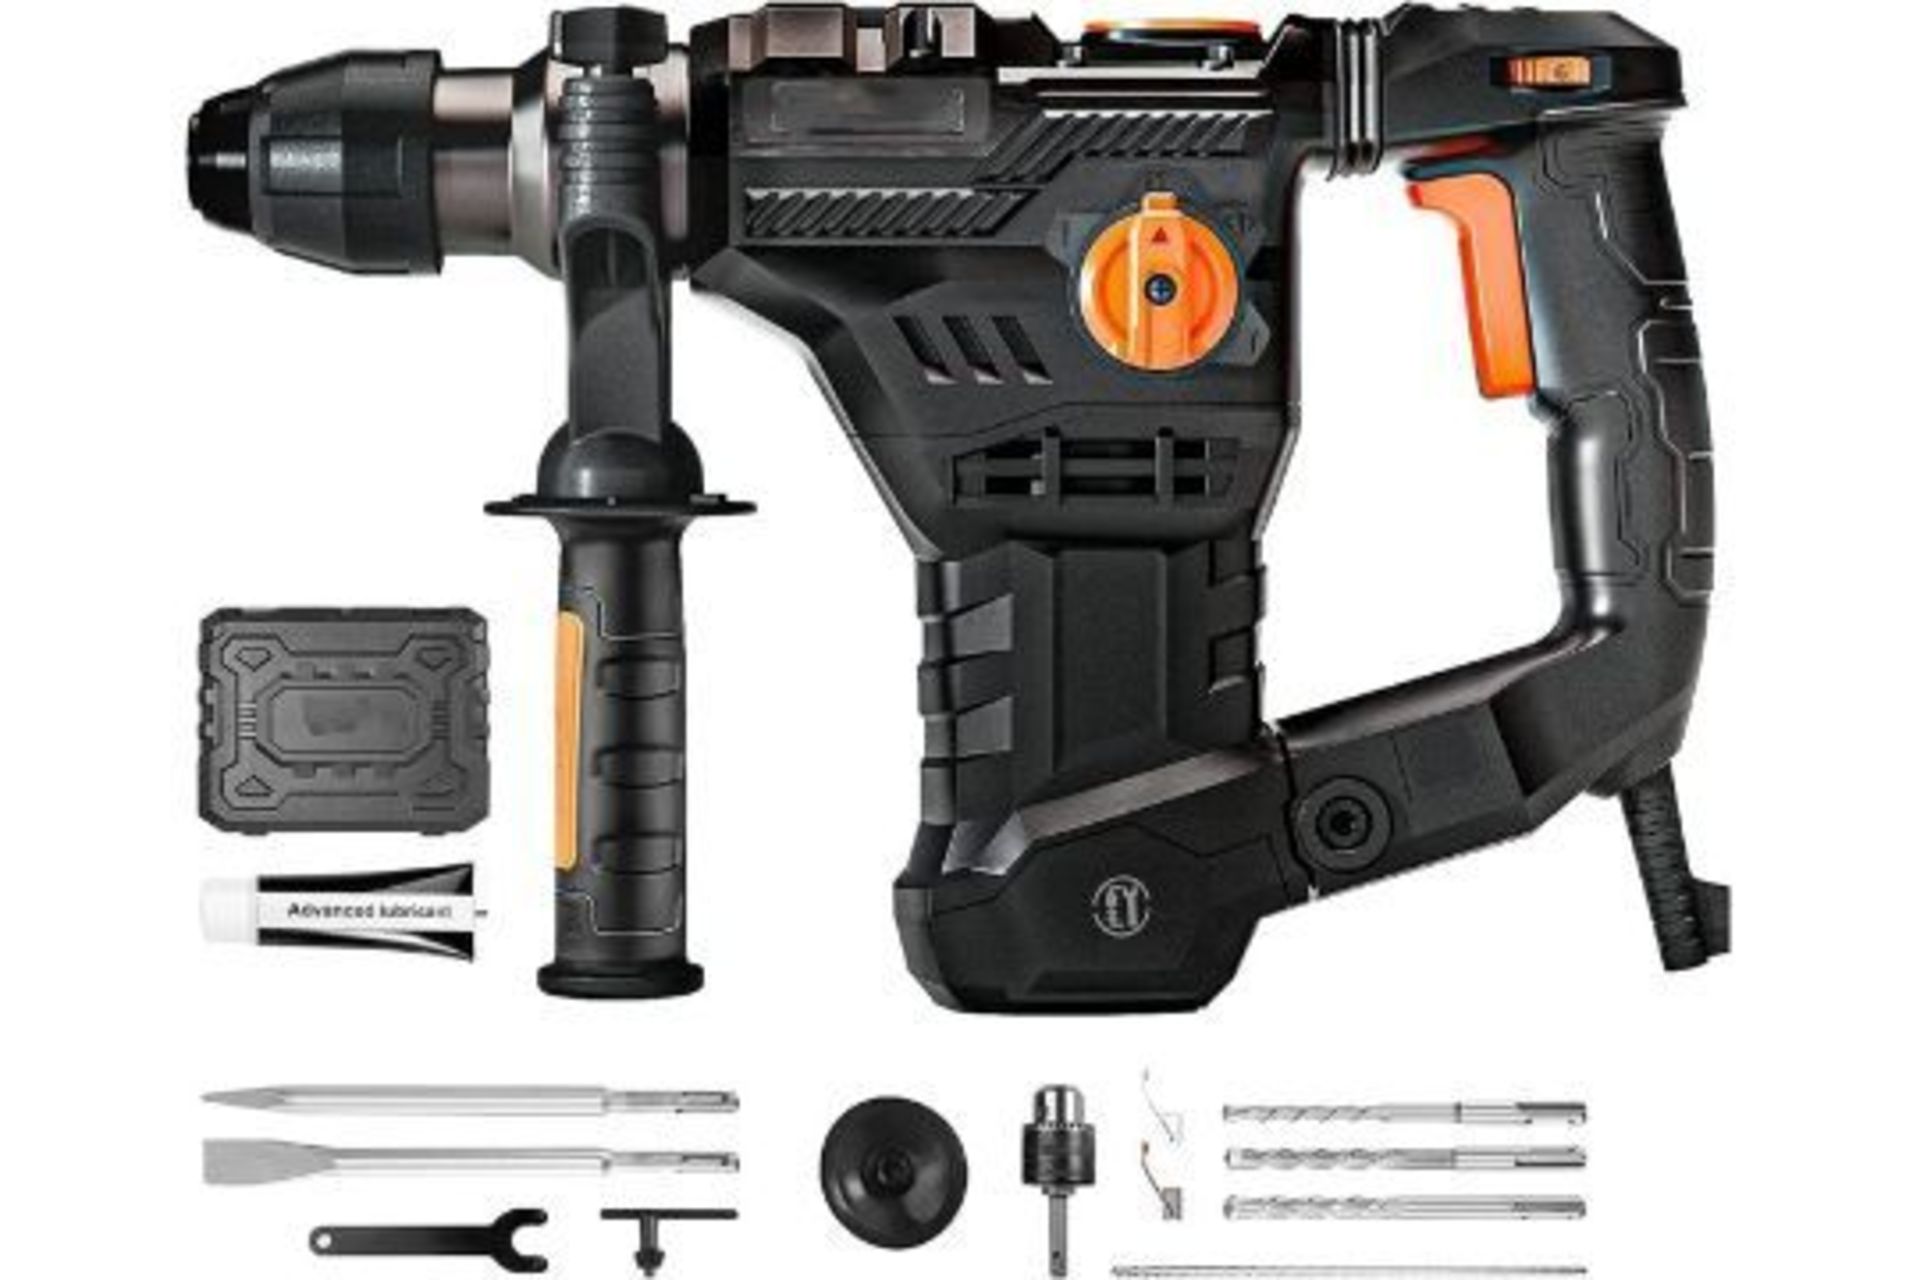 NEW BOXED Hammer Drill, Rotary Hammer Drill 1500W 7J with SDS Plus Chuck and Vibration Control,